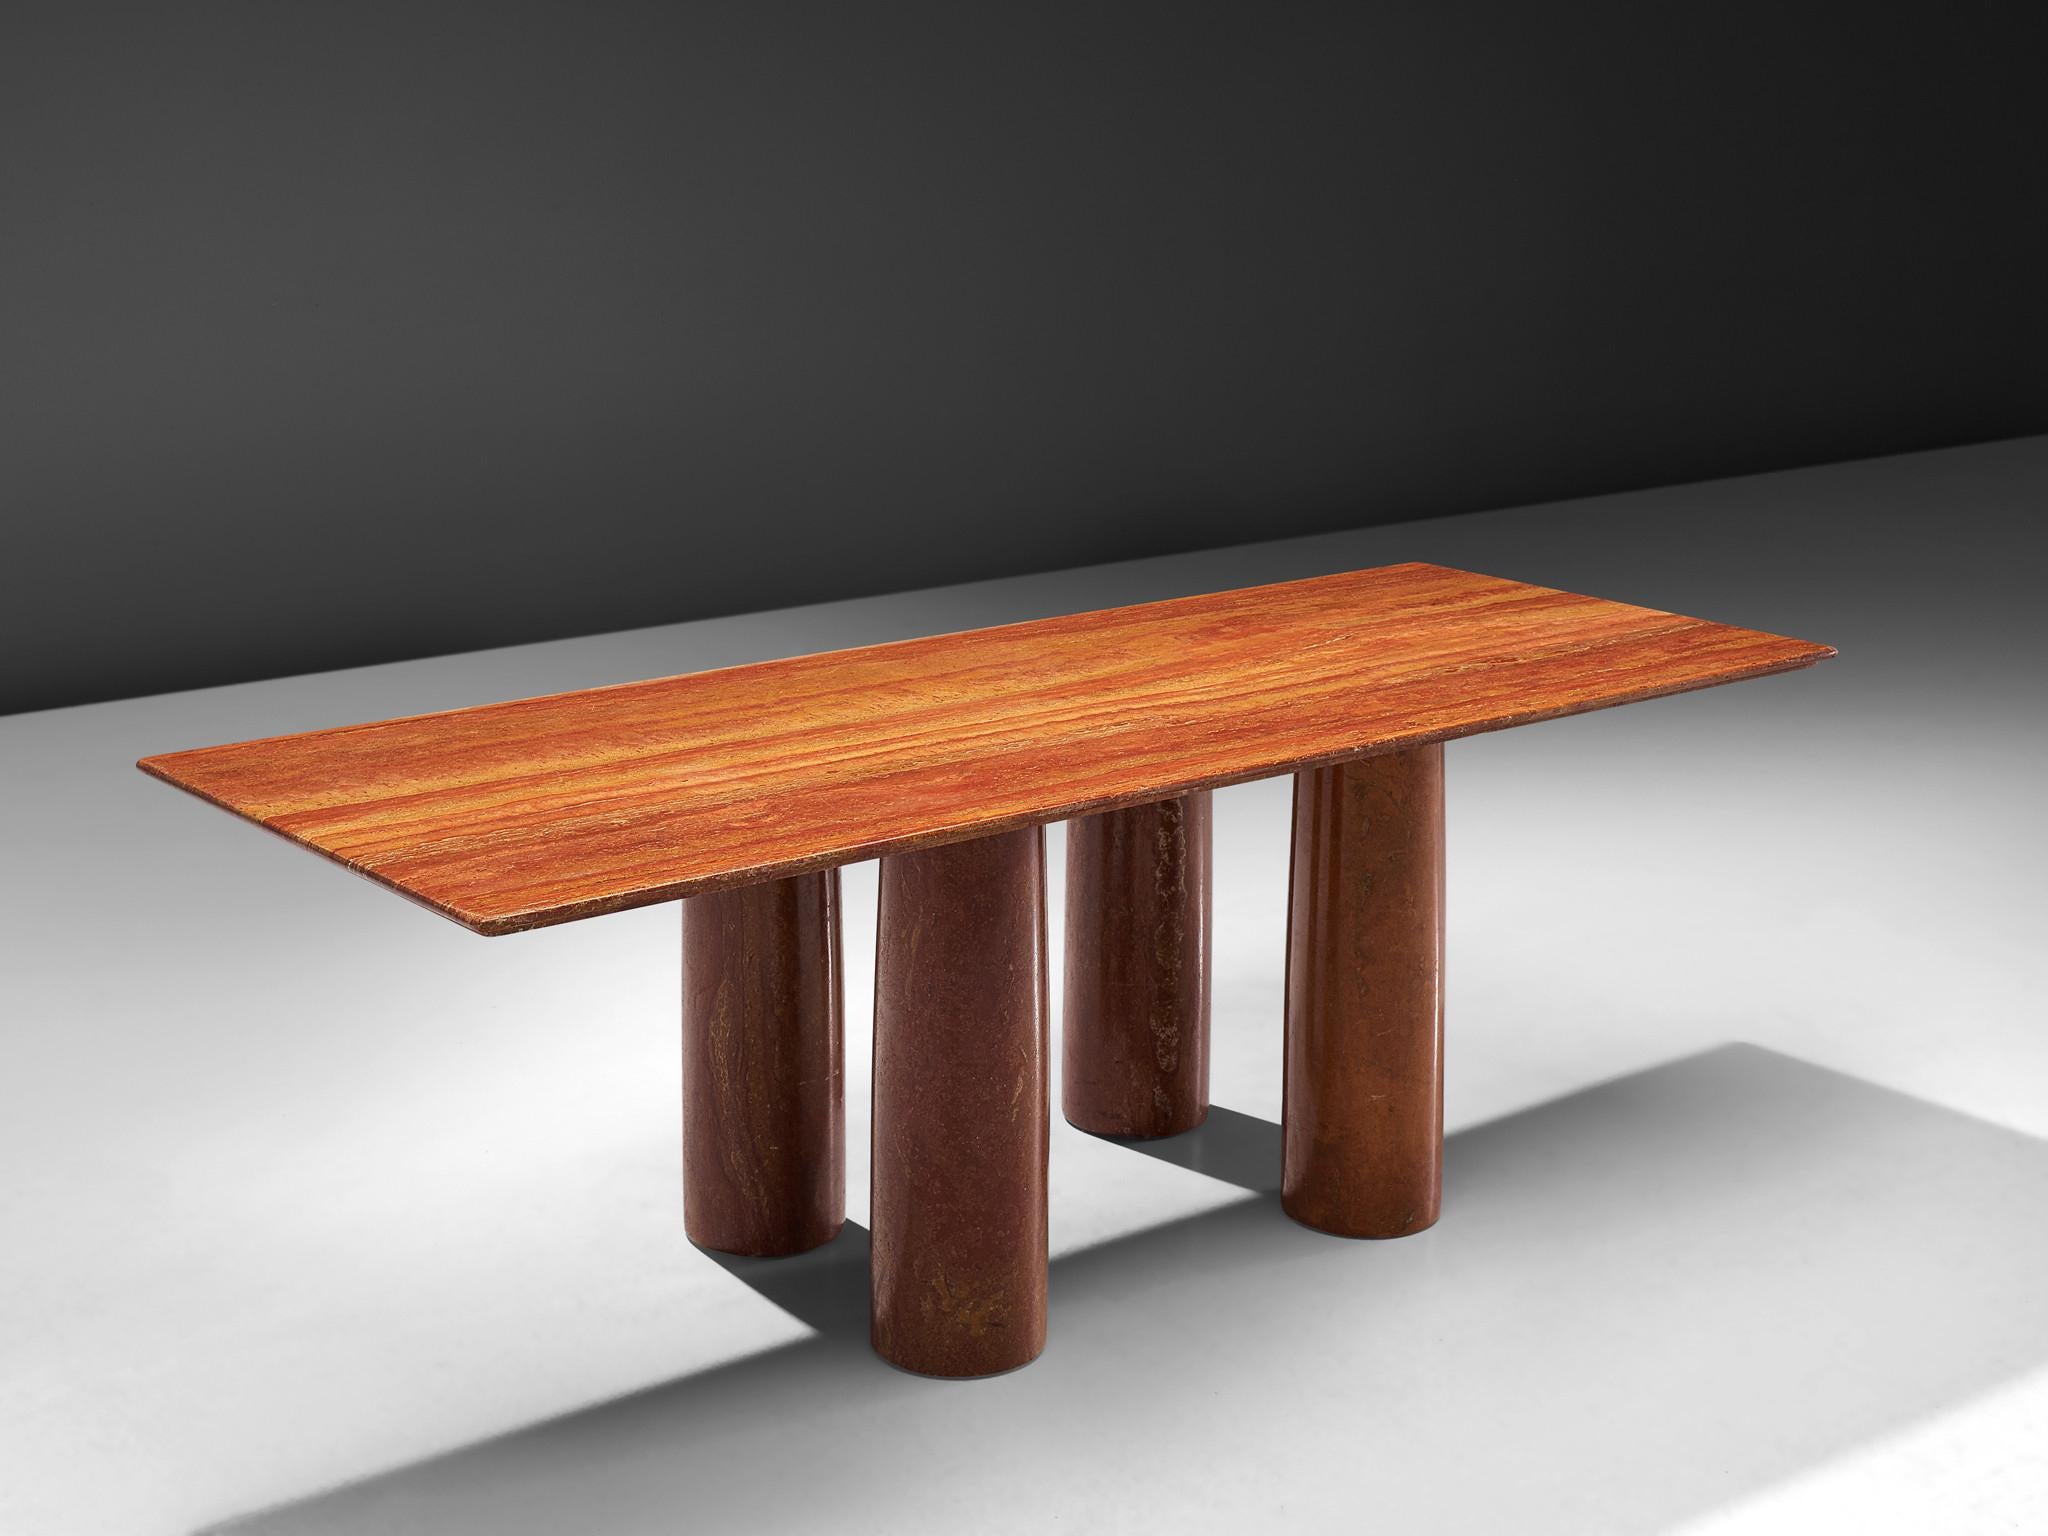 Mario Bellini 'Il Colonato' table, red travertine, Italy, 1970s.

This 'Il Colonnato' dining table was designed by Italian designer Mario Bellini. For this series of tables, Bellini was inspired by ancient Roman columns. This table consist of four